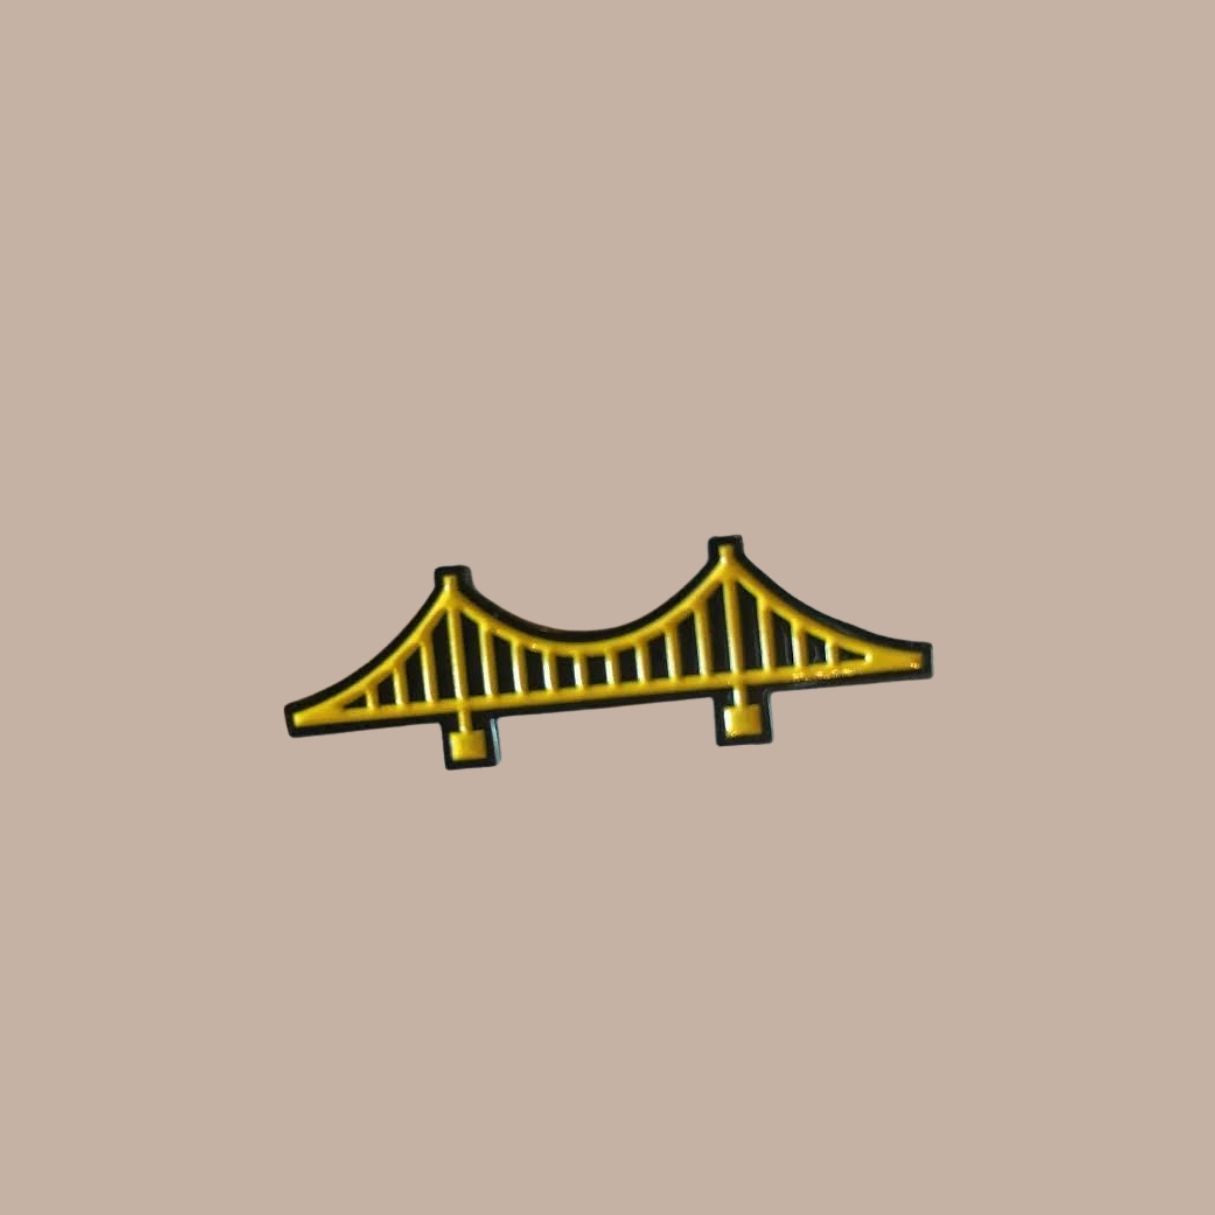 Yellow Bridge Pin - Commonwealth Press - Box Builder Item - KINSHIP GIFT - Black & Gold, Commonwealth Press, housewarming, LDT:GW:RESTRICT, Men - Pittsburgh - gift - boxes - gift - baskets - corporate - gifts - holiday - gifts